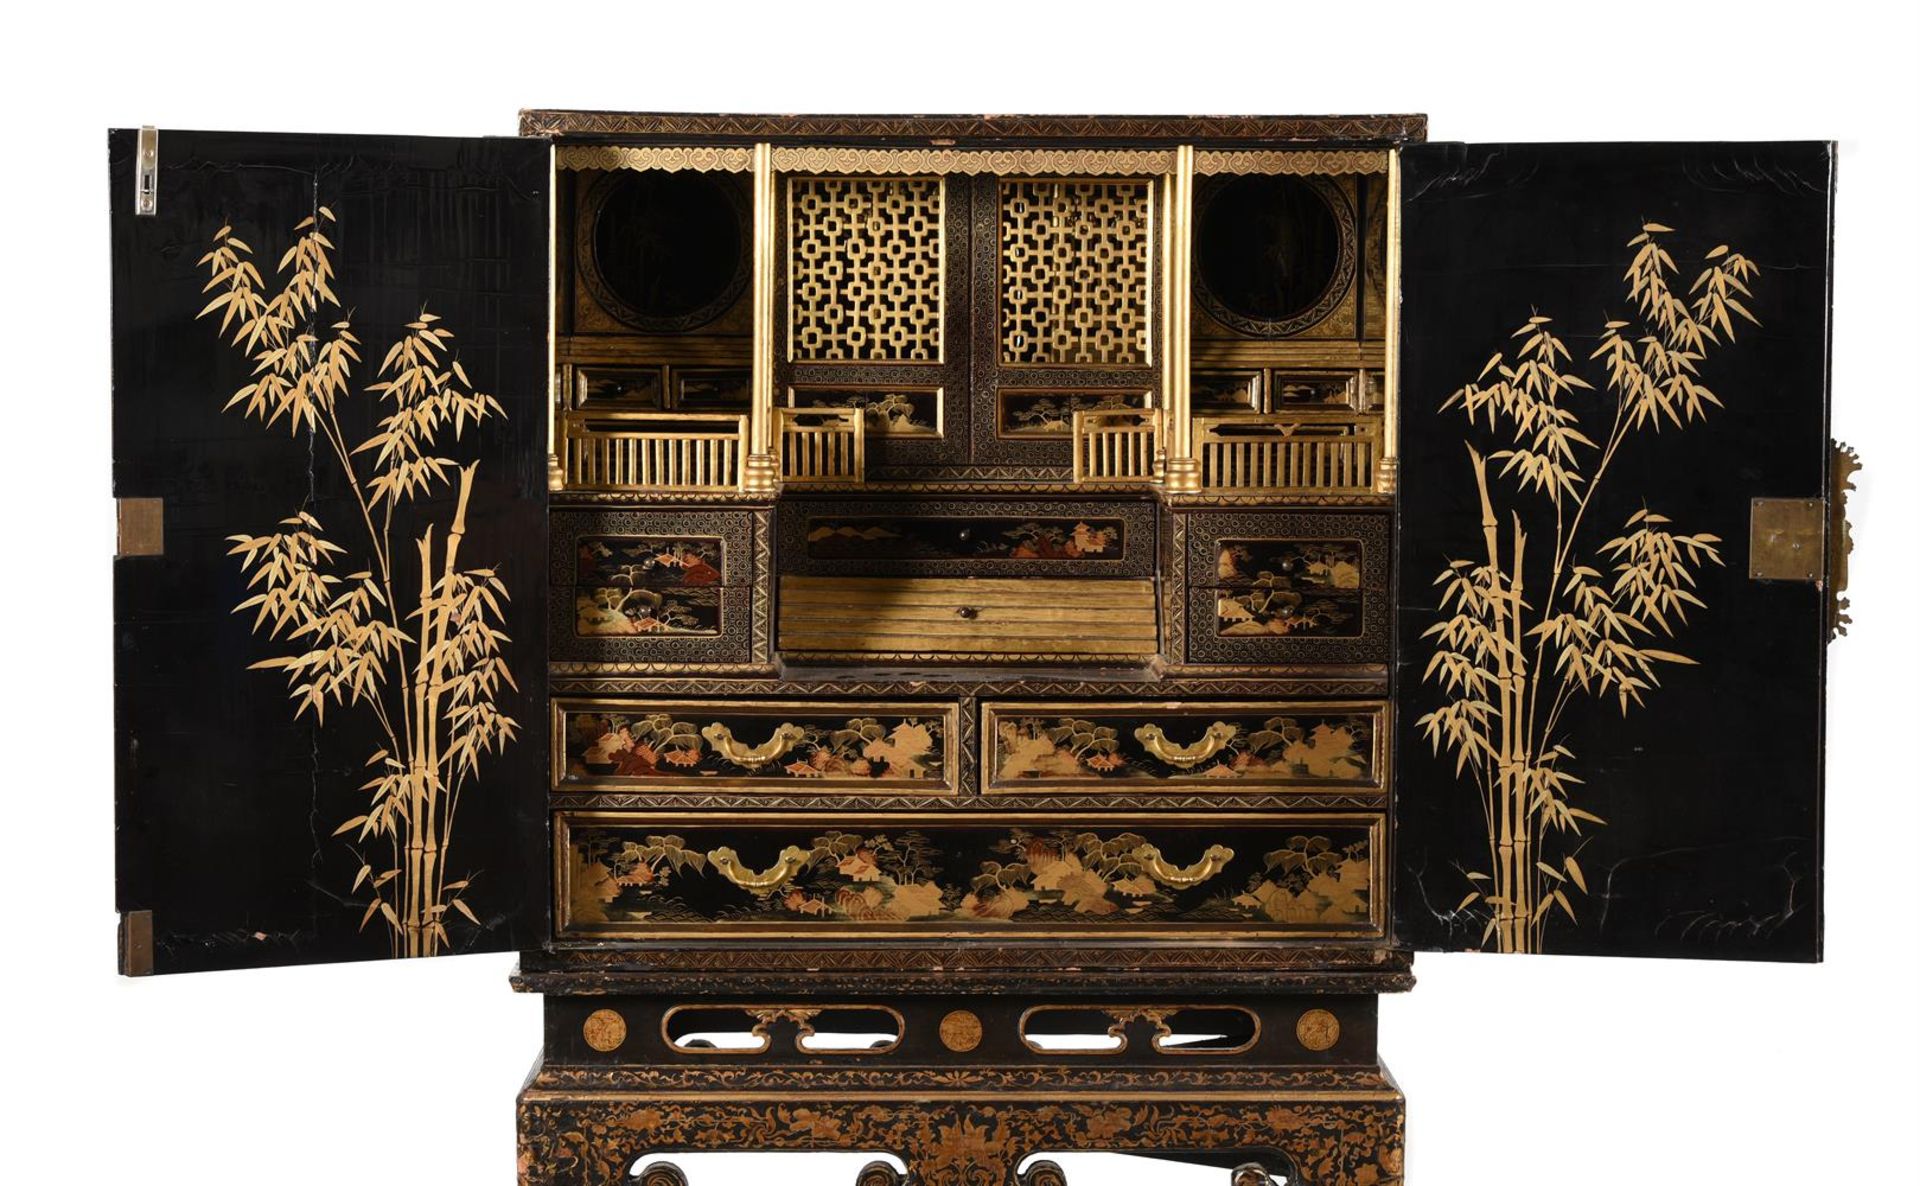 A CHINESE EXPORT LACQUER CABINET ON STAND, LATE 18TH OR EARLY 19TH CENTURY - Bild 4 aus 15